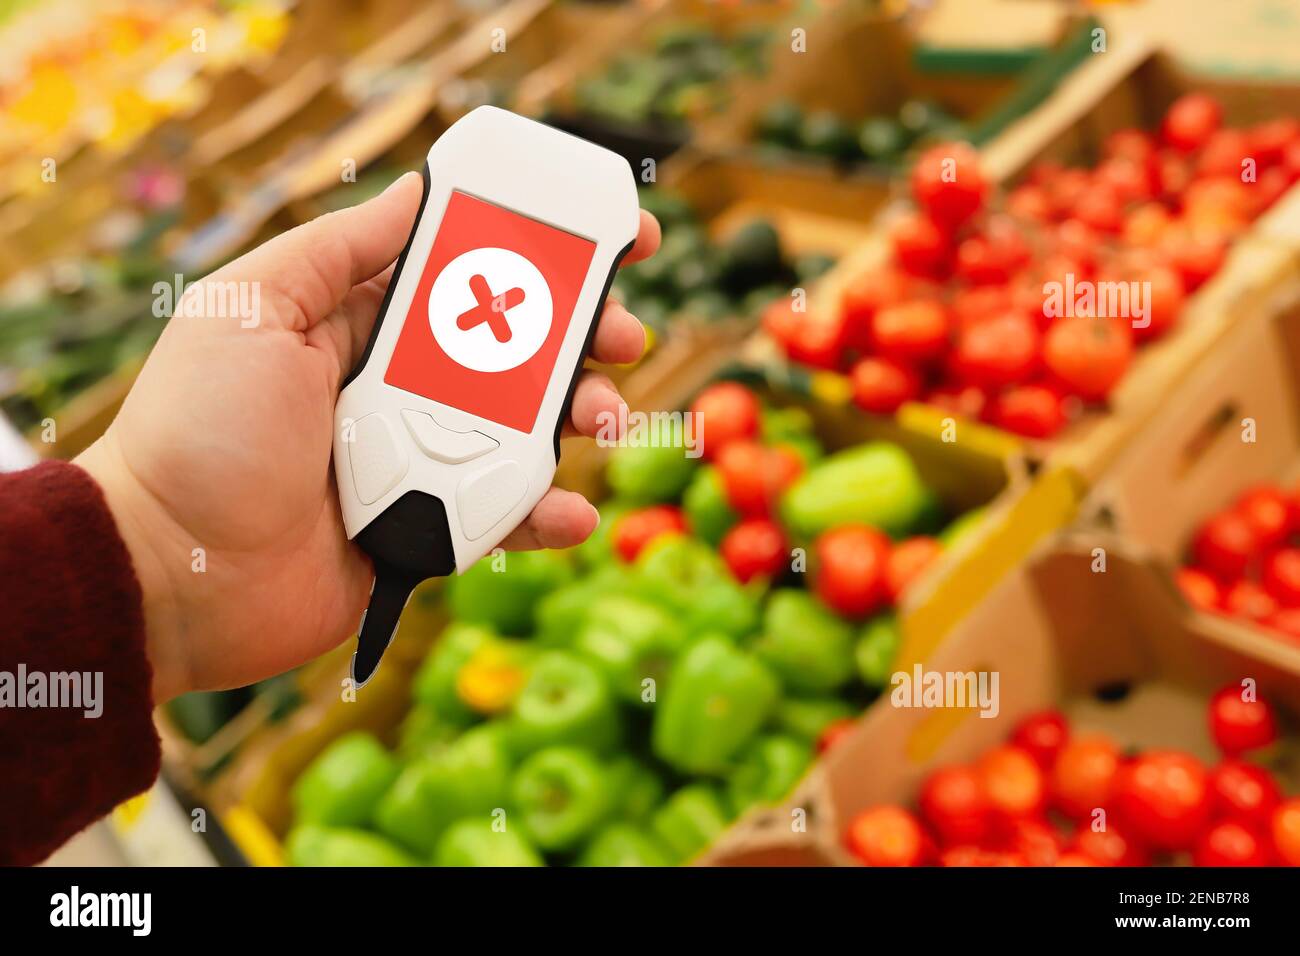 Use nitrate tester in market to buy organic vegetables and fruits. Inspection of farm products to high content of nitrates and nitrites. Dangerous exc Stock Photo